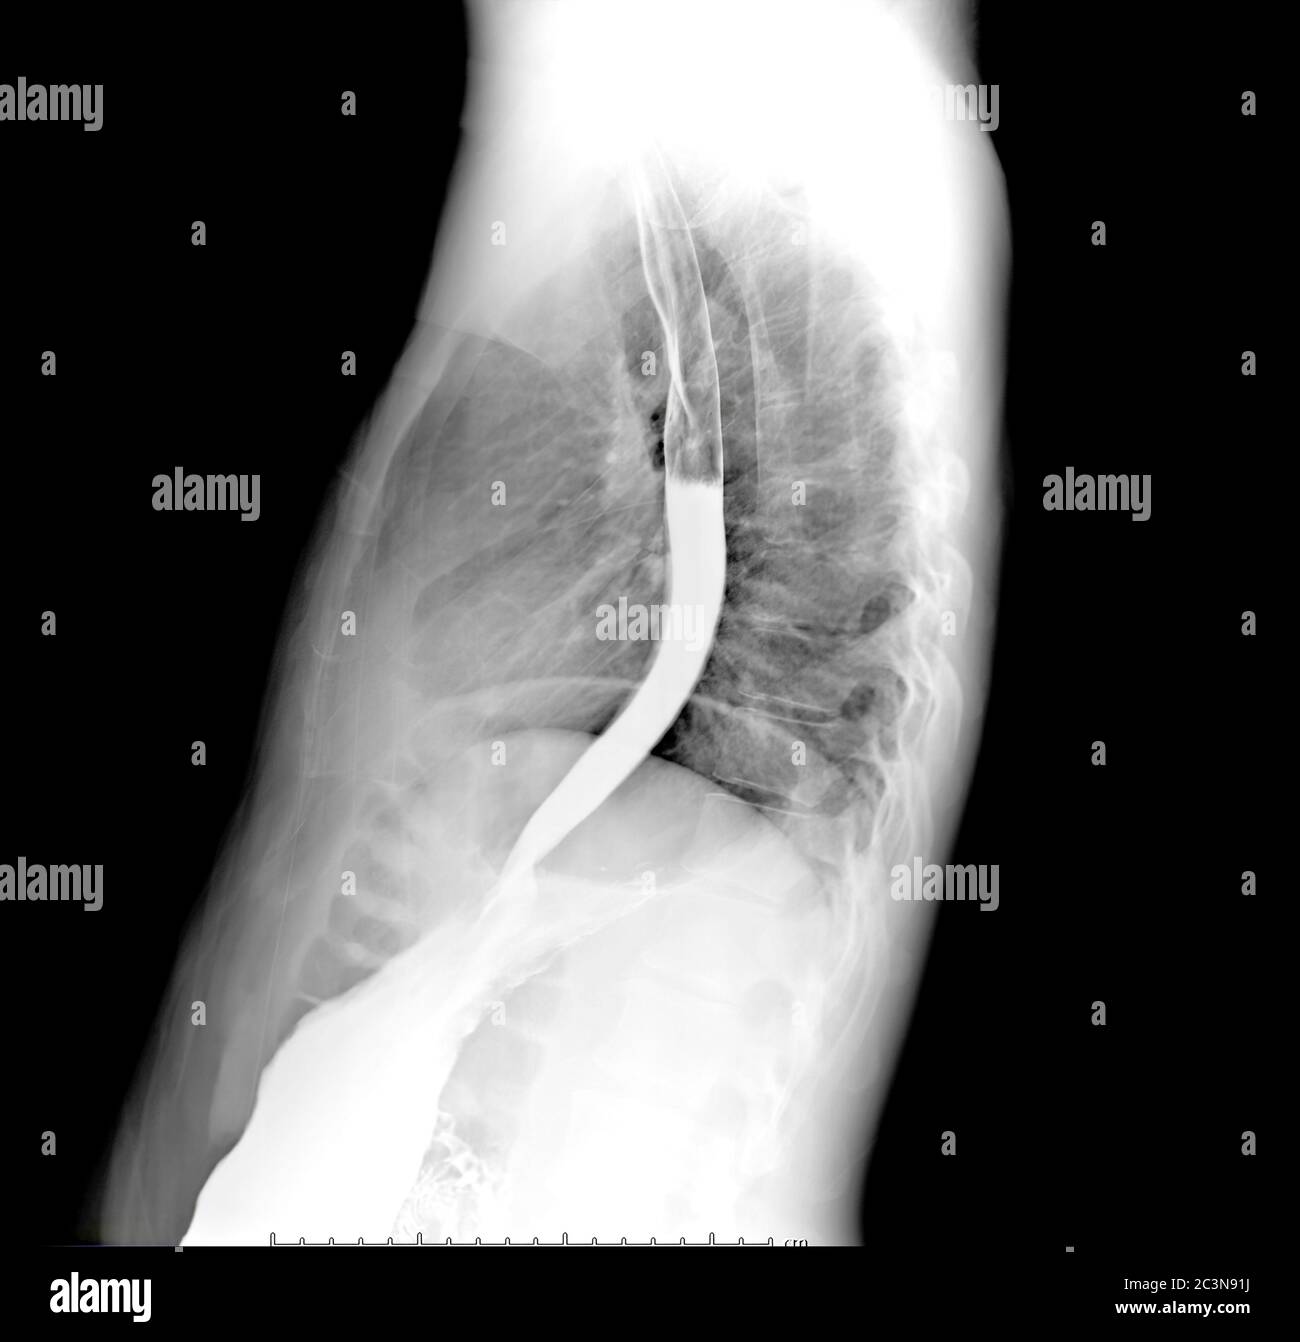 Esophagram or Barium swallow Lateral view  showing esophagus. Stock Photo